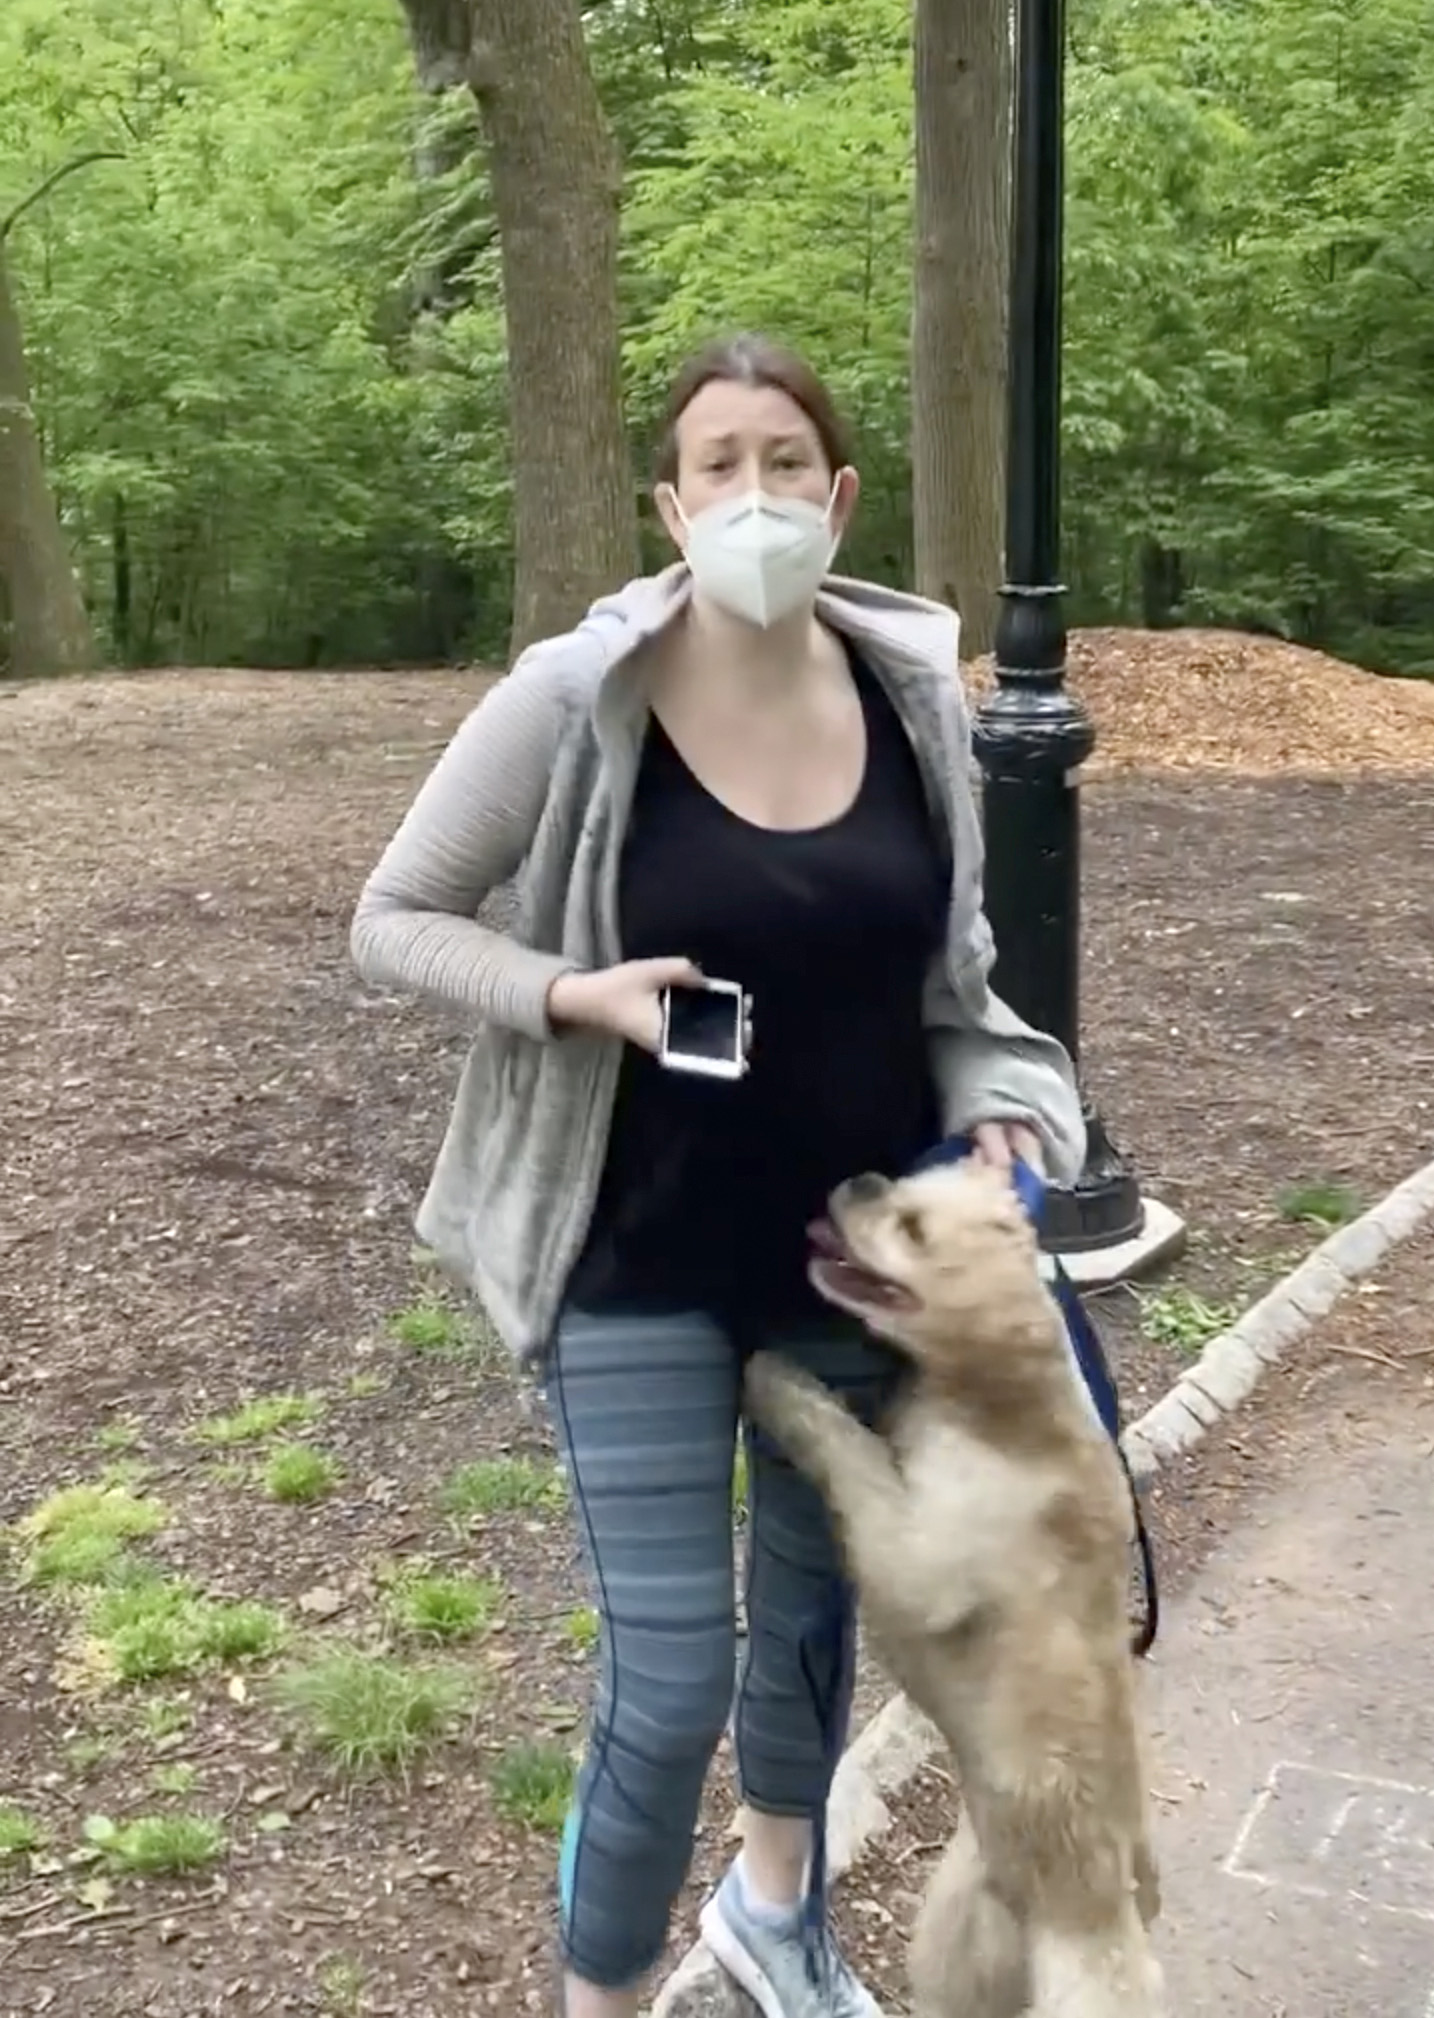 PHOTO: In this May 25, 2020 file photo, made from video provided by Christian Cooper, Amy Cooper talks with Christian Cooper in Central Park in New York.